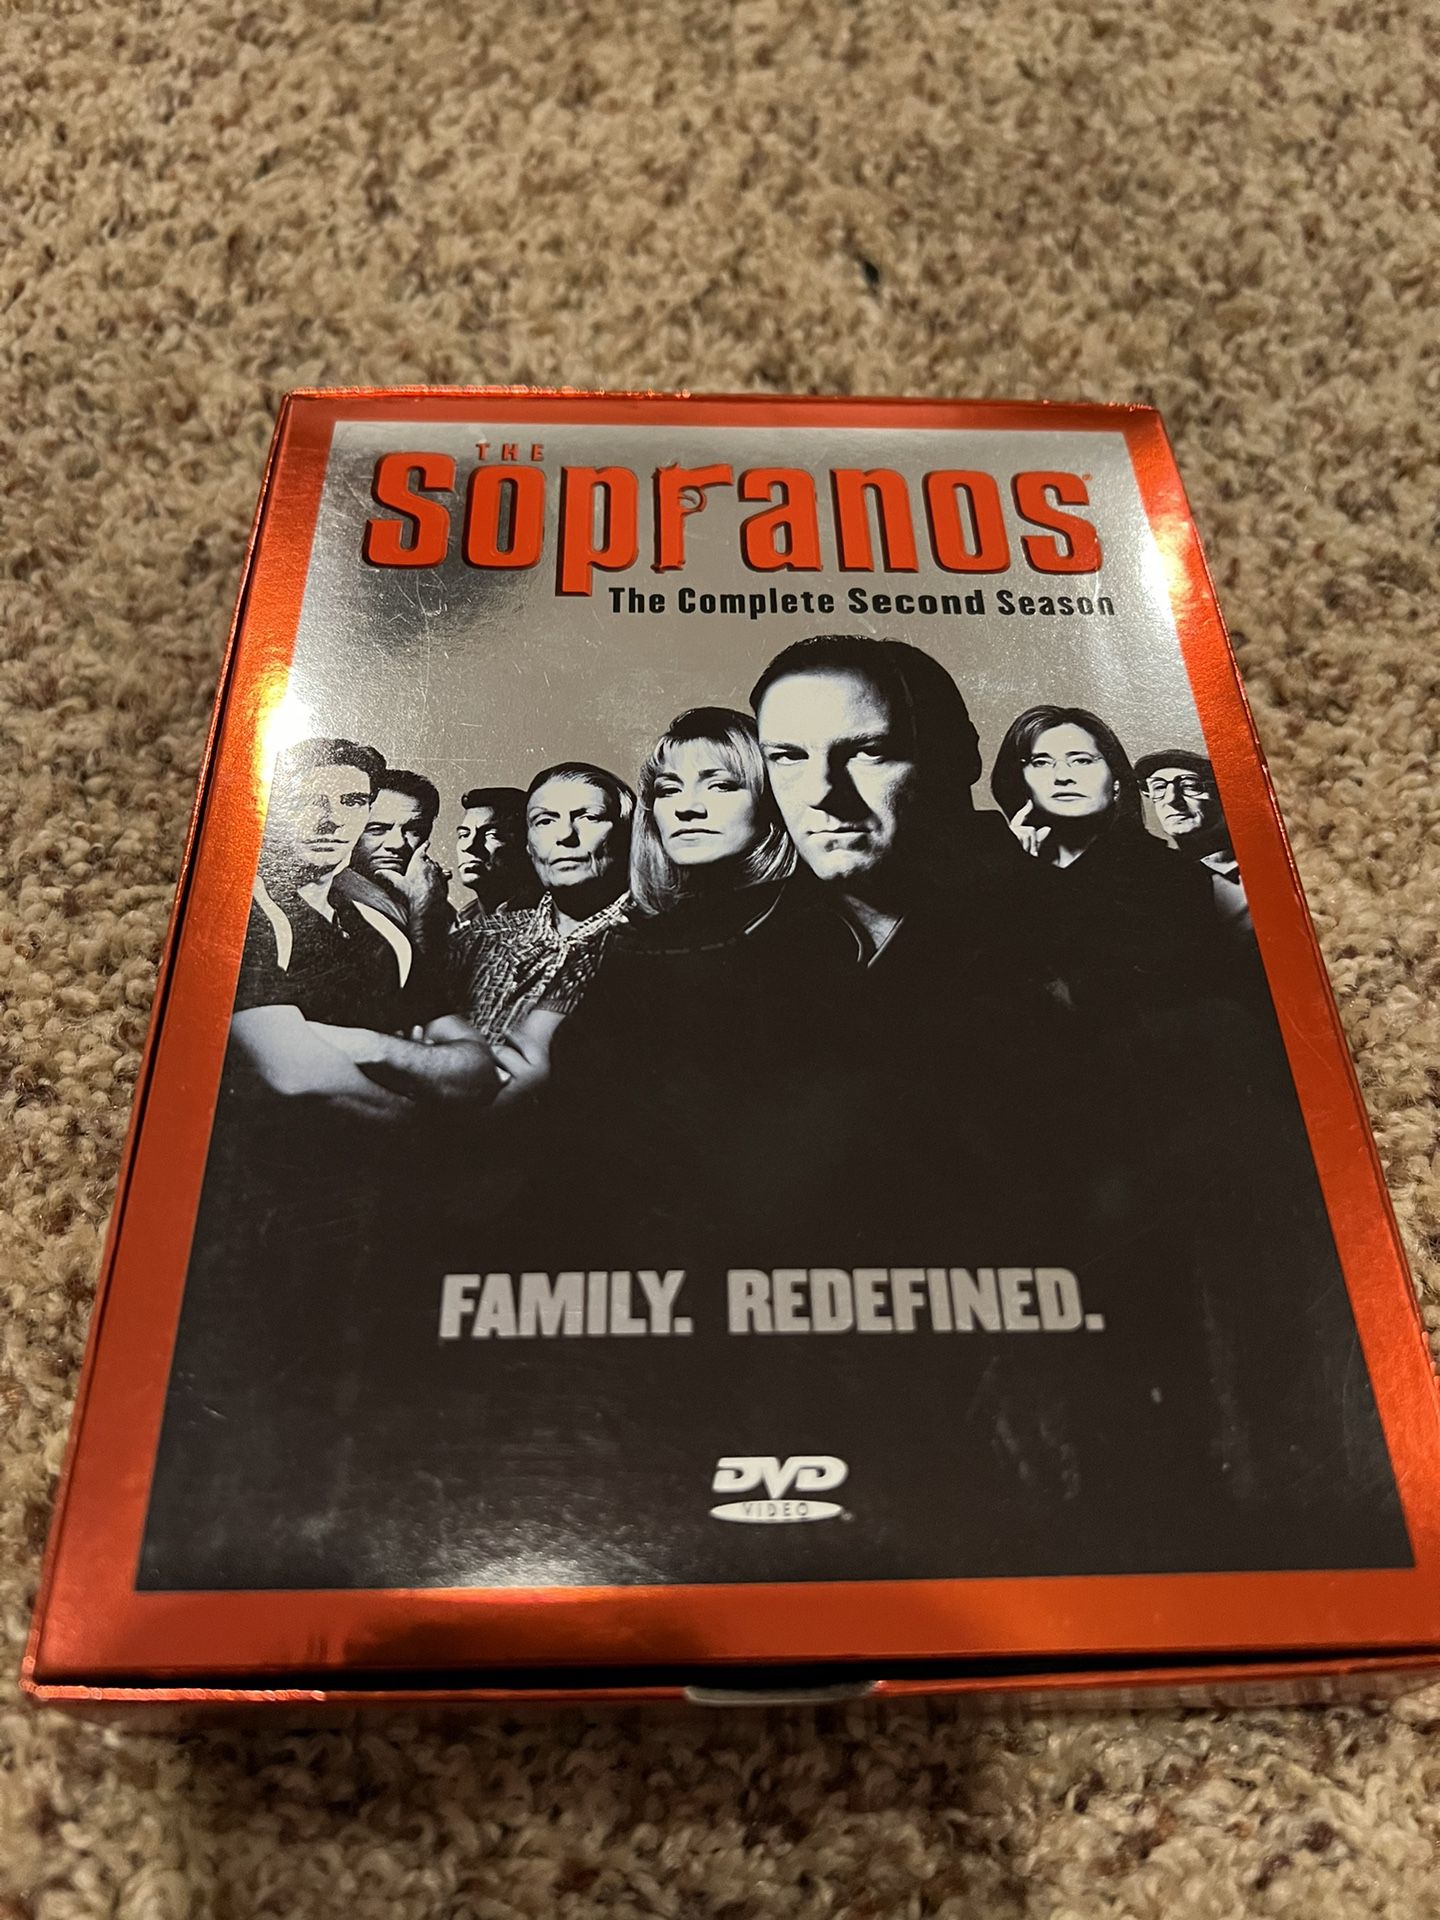 THE  Sopranos The Complete Second Season  FAMILY. REDEFINED.  DVD VIDEO 